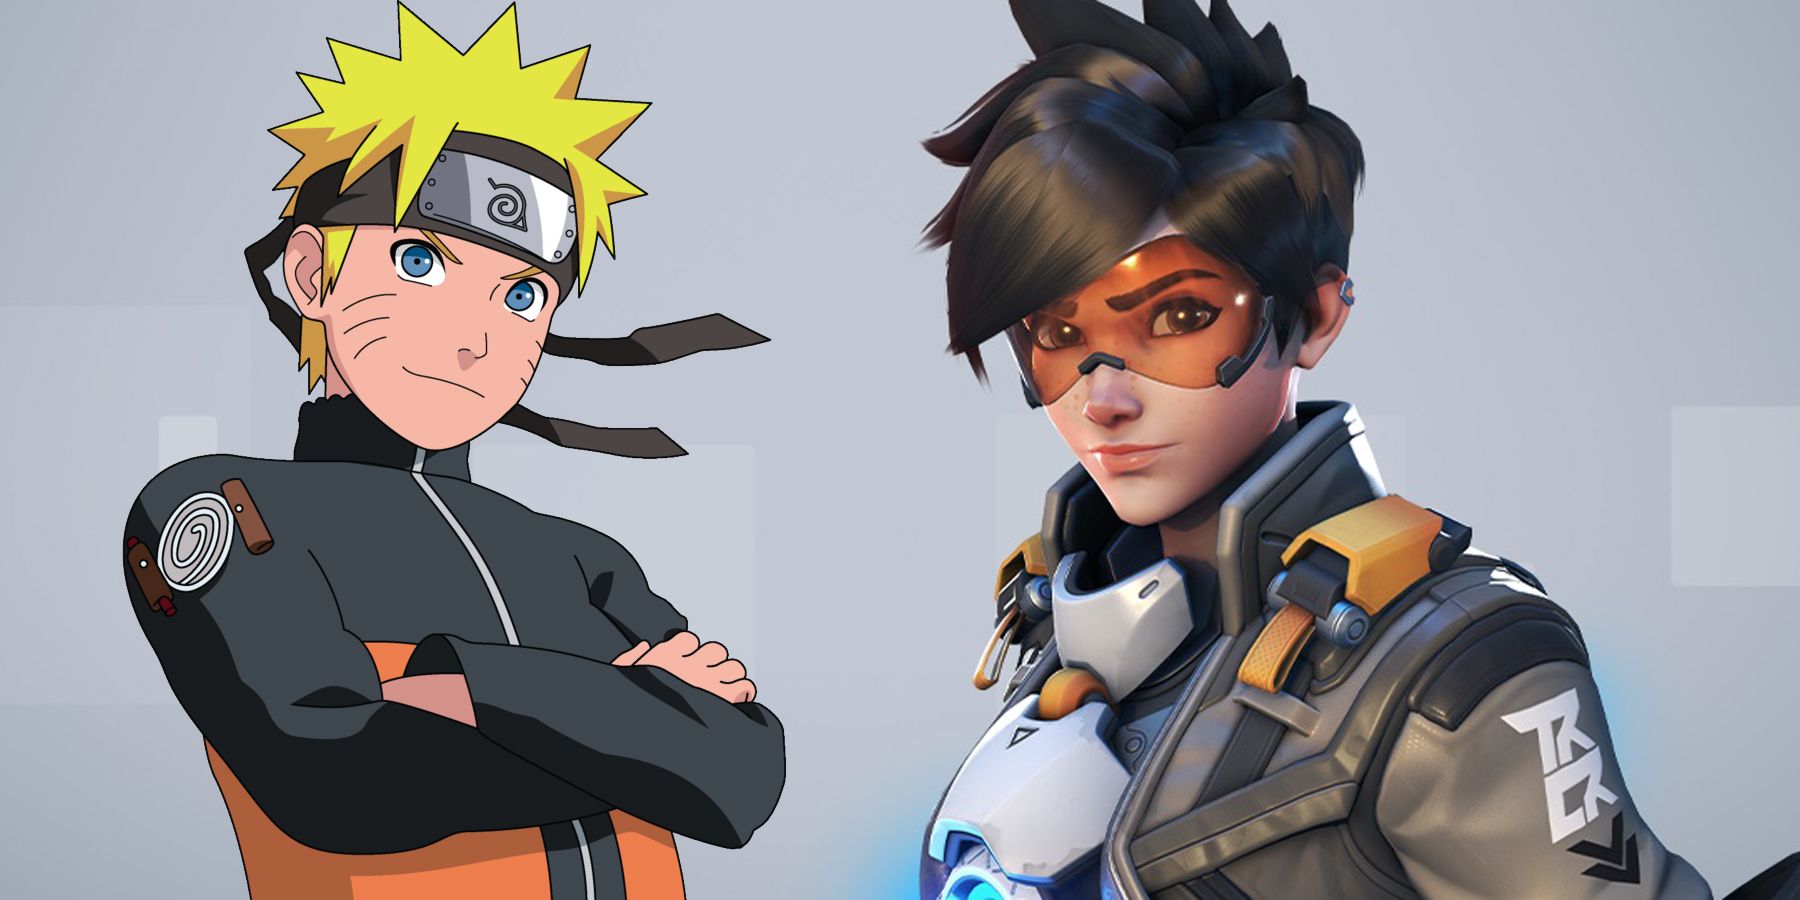 Overwatch 2 Tracer and Naruto edit